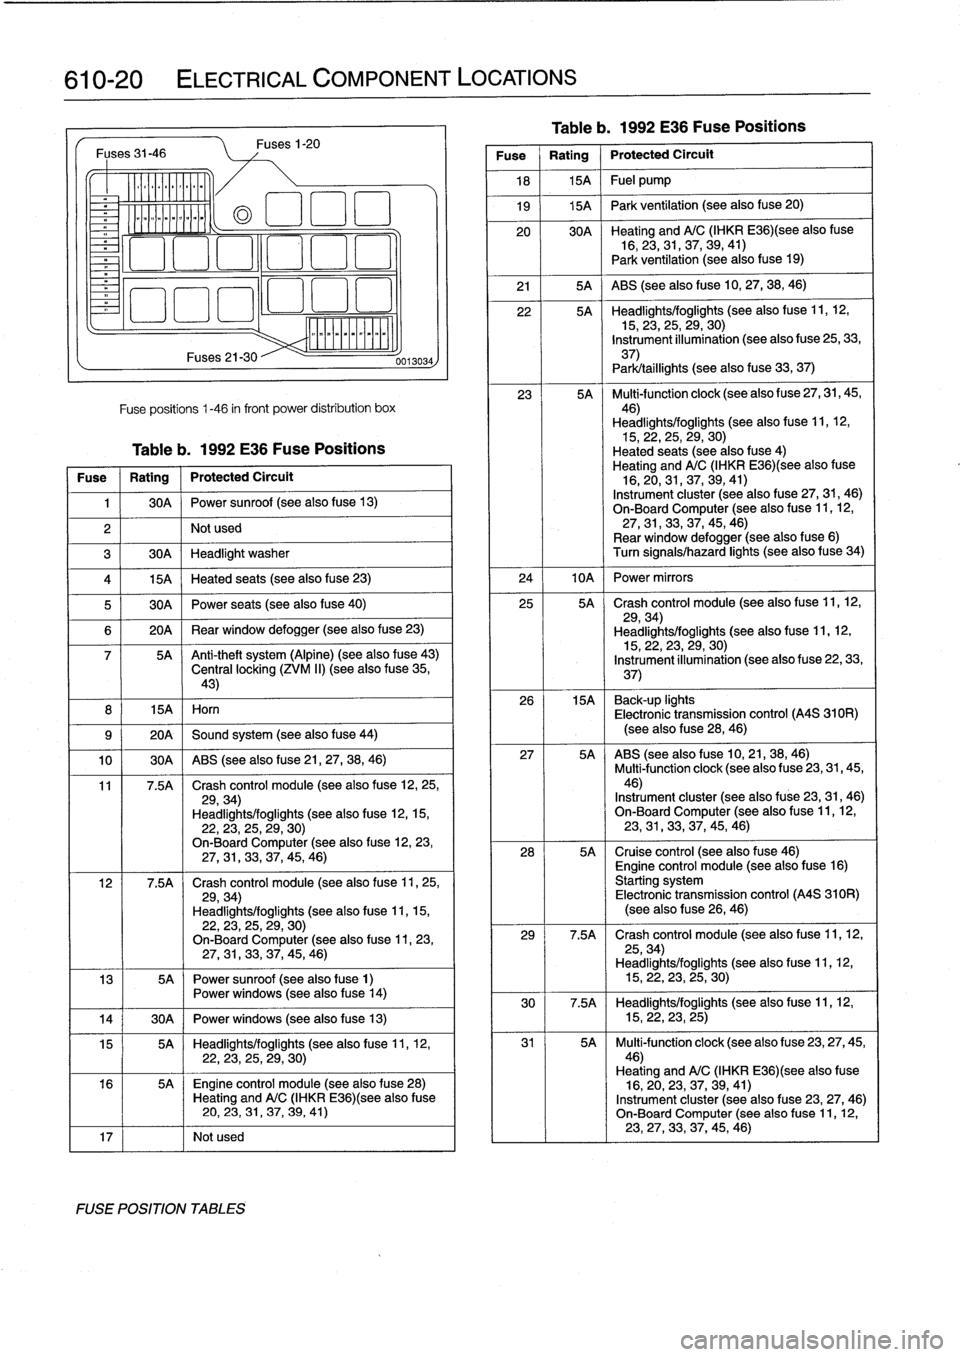 BMW 318i 1992 E36 Workshop Manual 
610-20

	

ELECTRICAL
COMPONENT
LOCATIONS

Fuses
31-46

o_

~oomoo
ommmo~

8
I

	

15A
I
Horn
Fuses21-30

Fuses
1-20

Fuse
positions
1-46
in
front
power
distribution
box

Table
b
.
1992
E36
Fuse
Posi